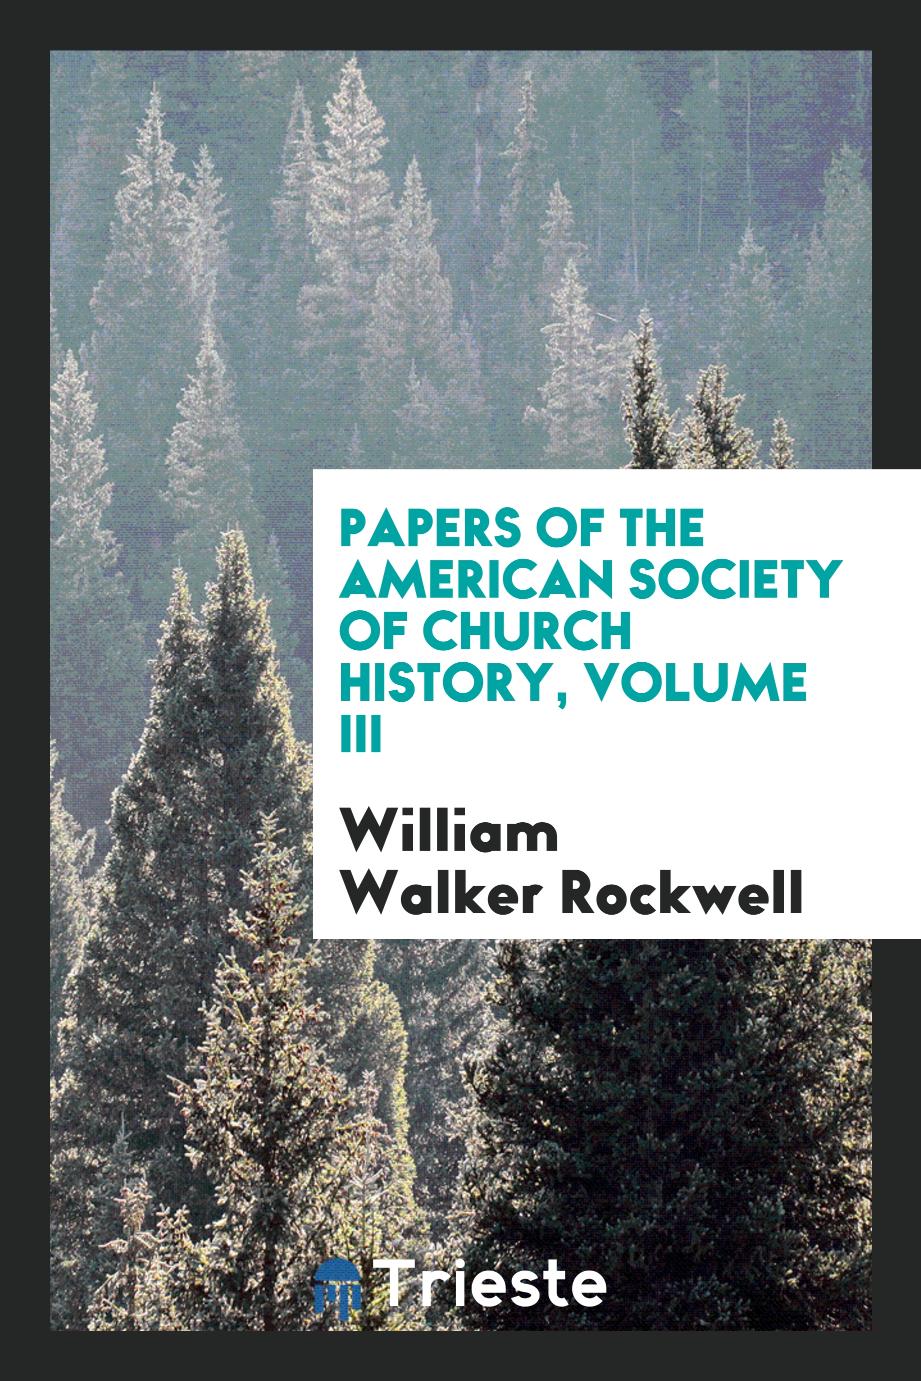 Papers of the American Society of Church History, Volume III